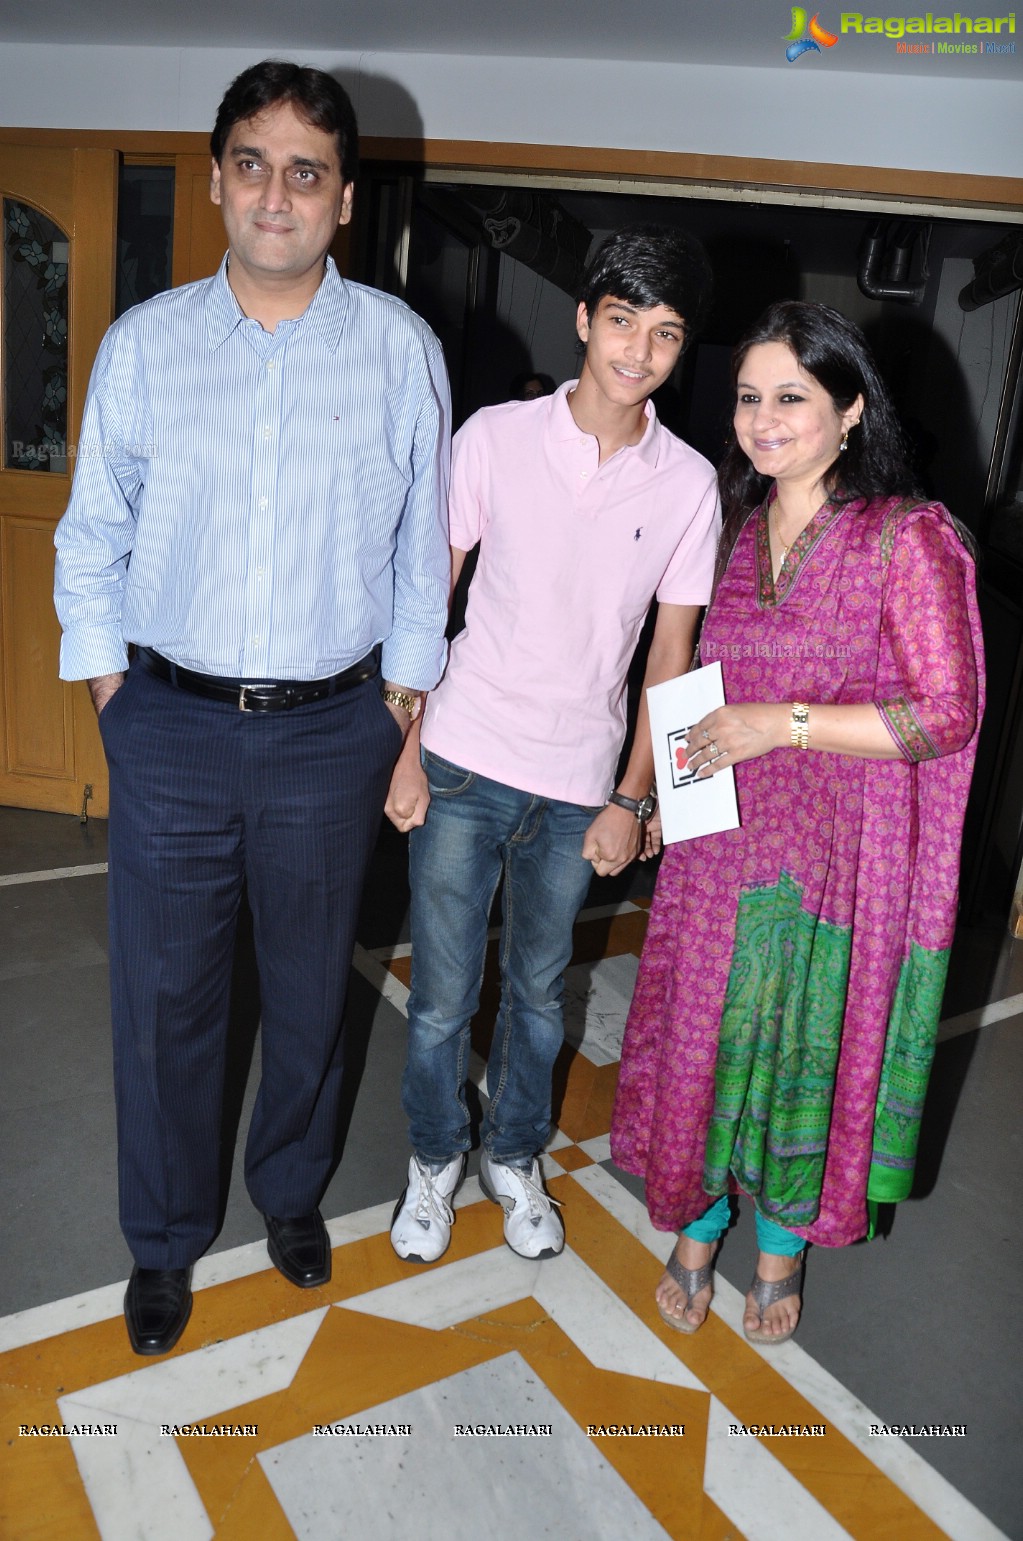 Screening of a Documentary film 'Handle with care' at LV Prasad Eye Institute, Hyderabad